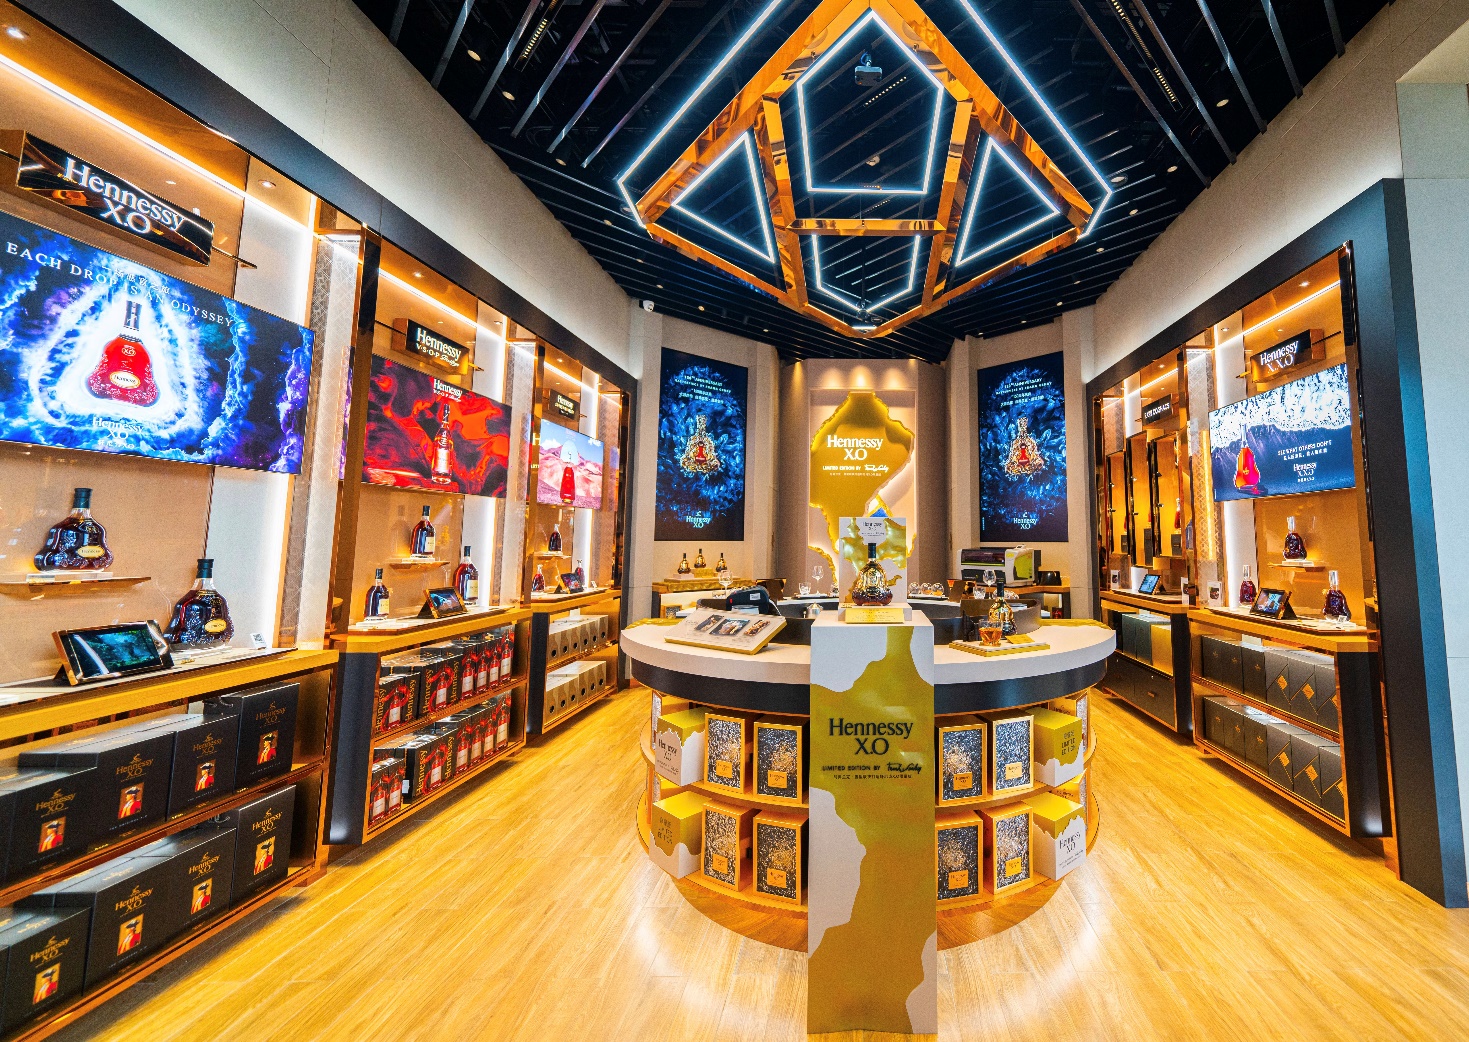 Hennessy offline store in Sanya. Credit: Lexiang life